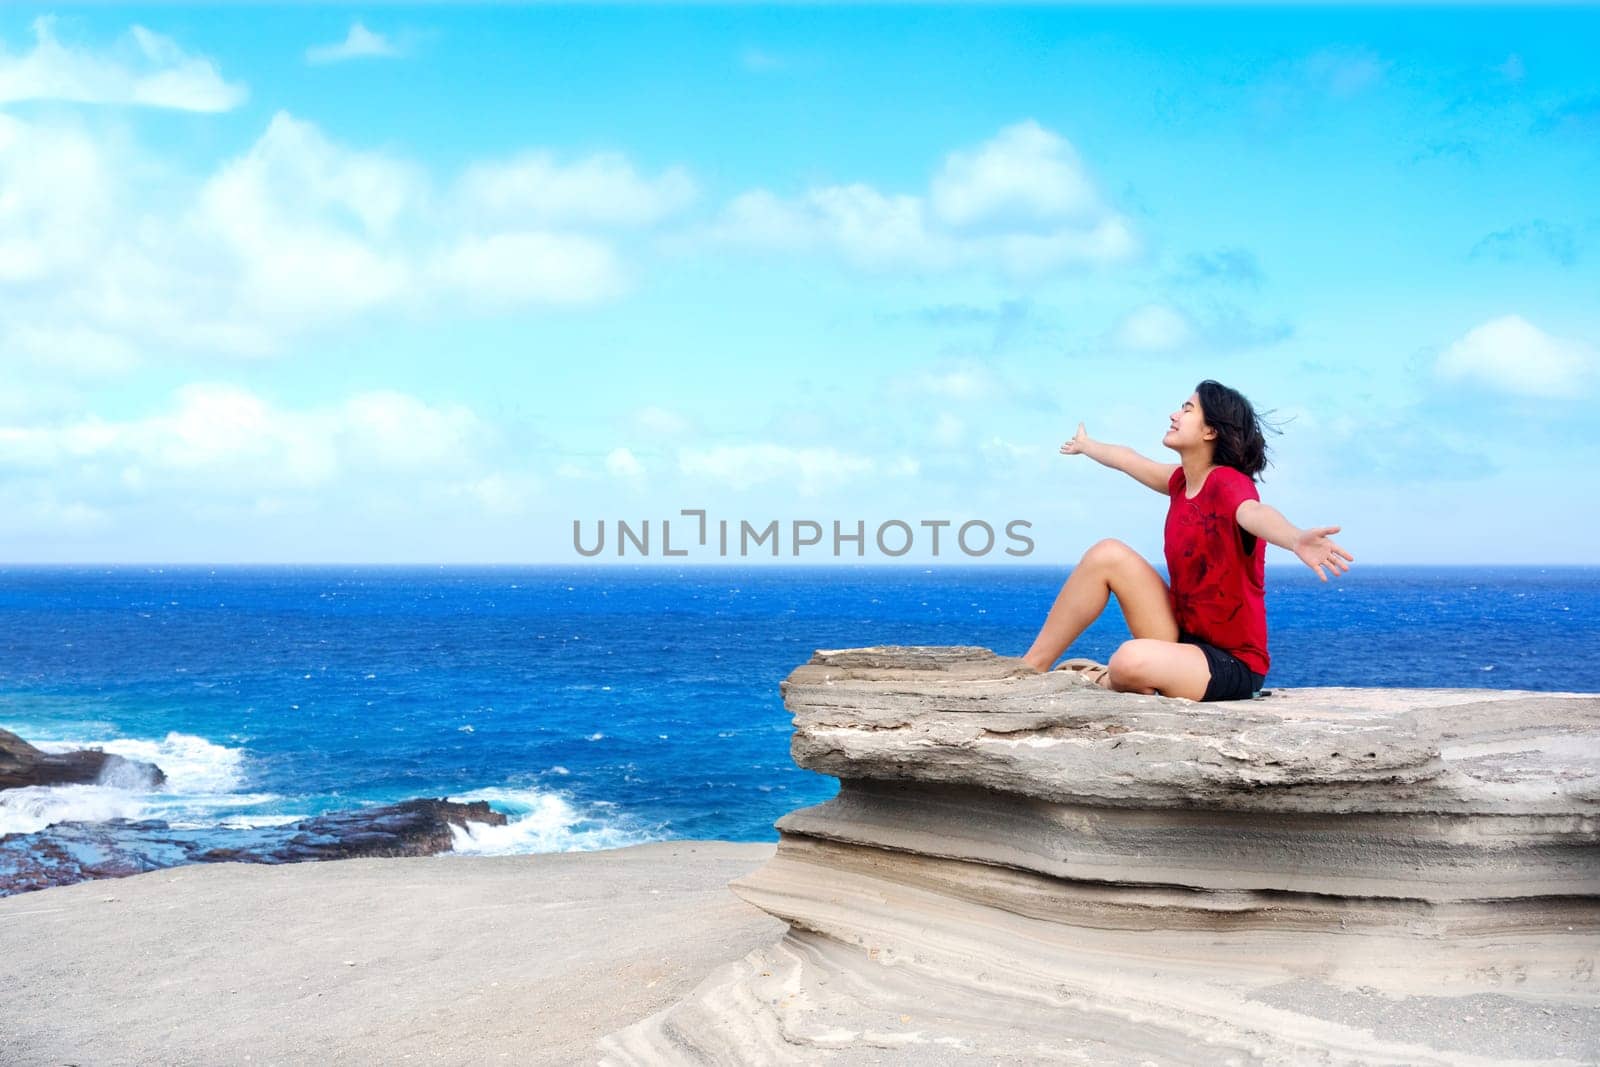 Young woman sitting on large rock cliff  by Hawaiian  ocean, arms raised enjoying breeze